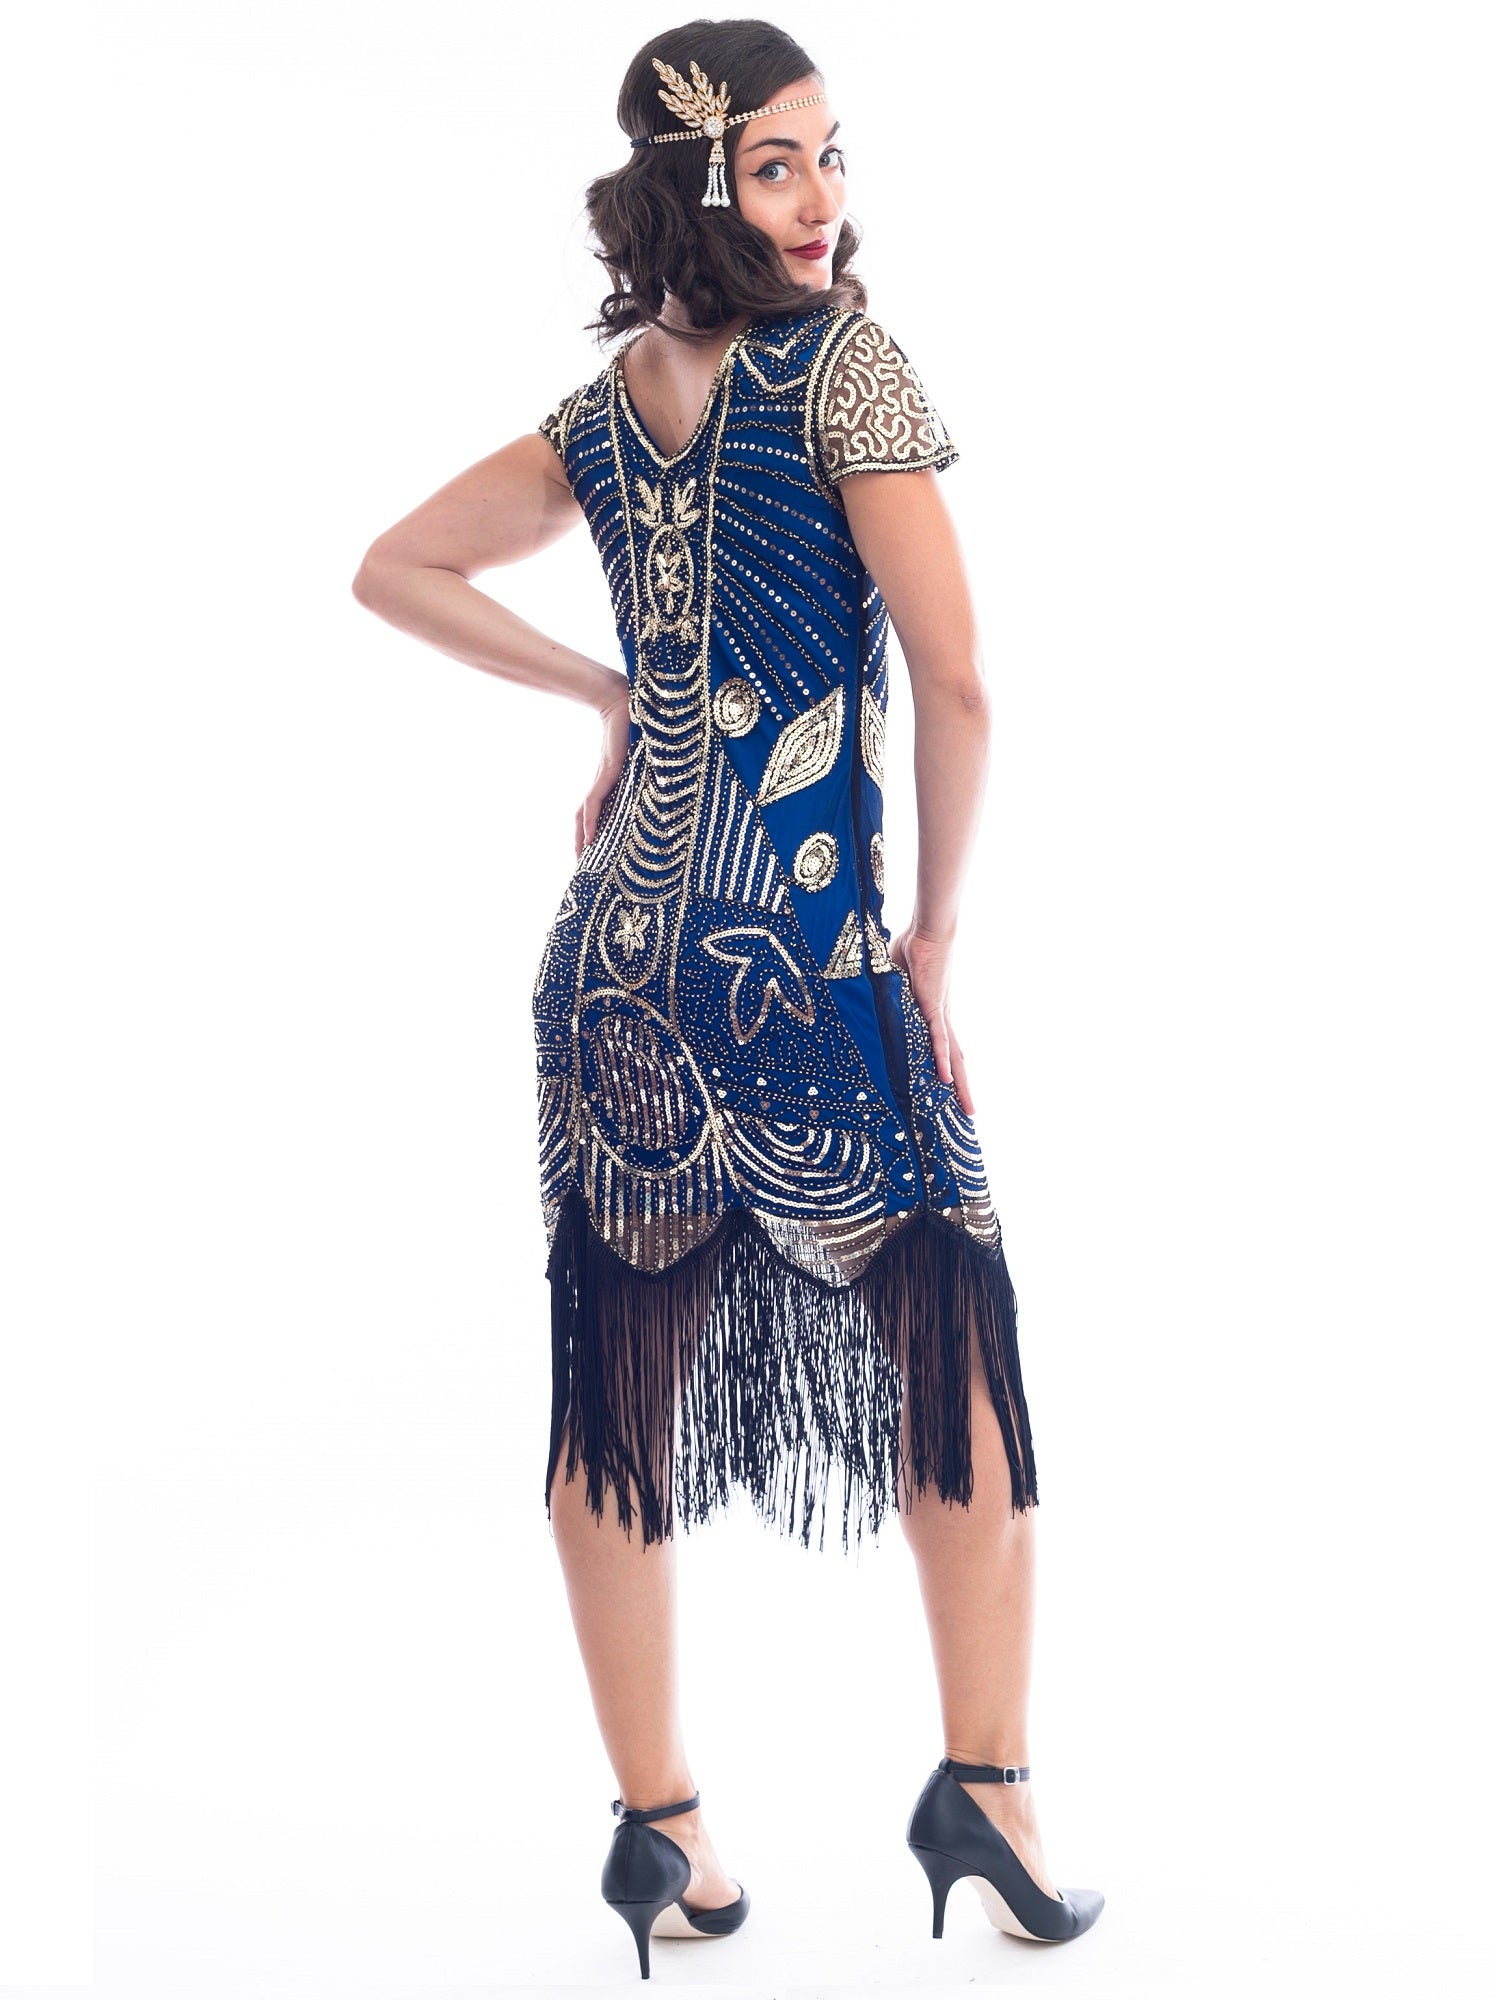 A back view 1920s Blue Gatsby Dress with gold sequins, gold beads and fringes around hem